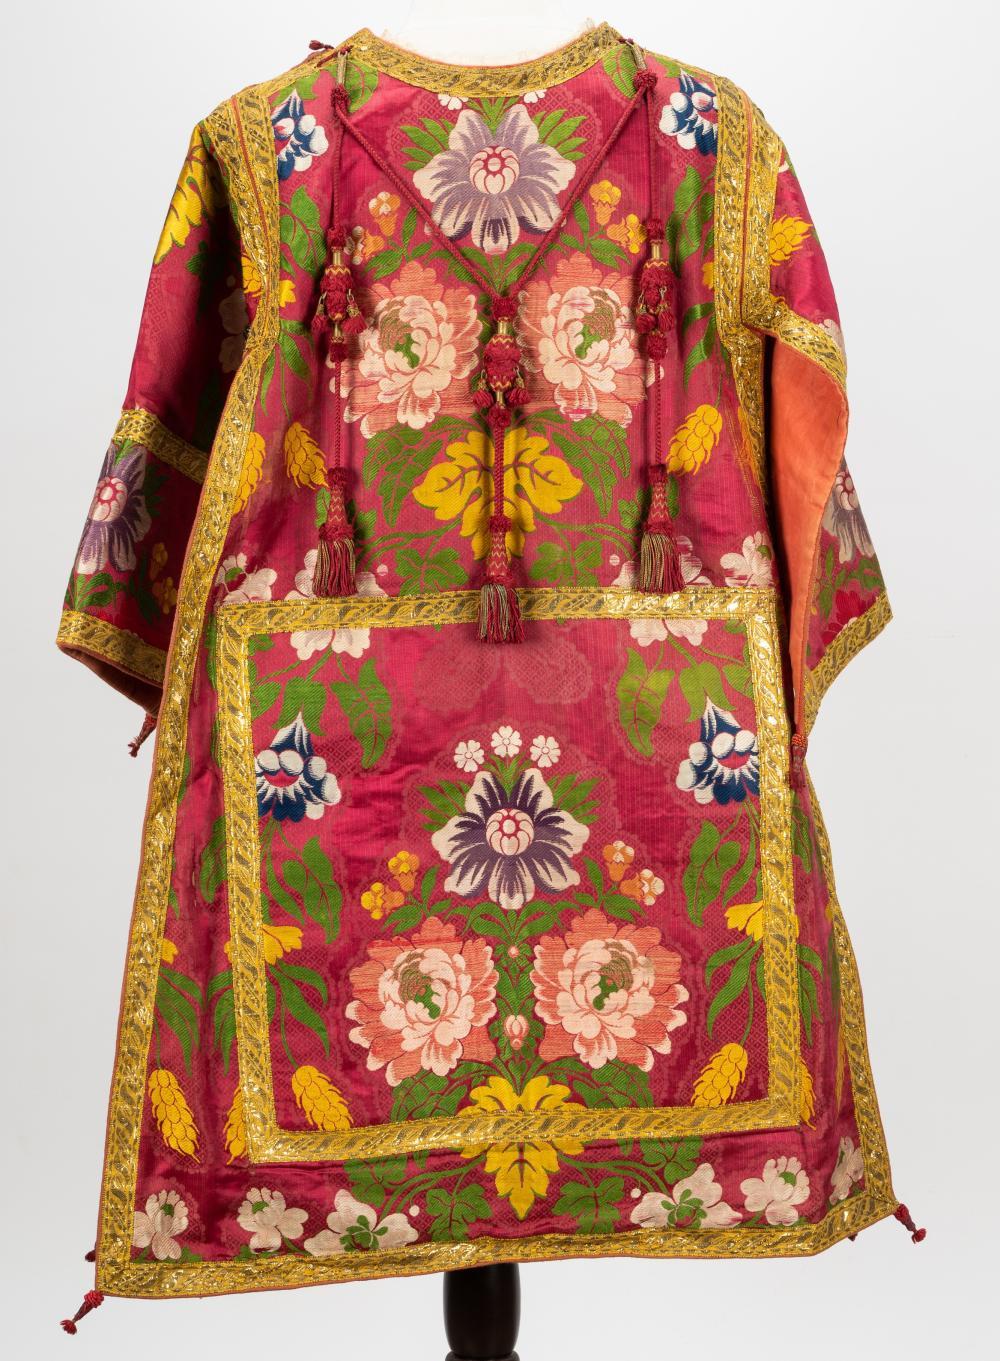 Colonial Spanish Silk Religious Dalmatic Robe Chasuble of Spanish Colonial, Textile, handmade in silk.